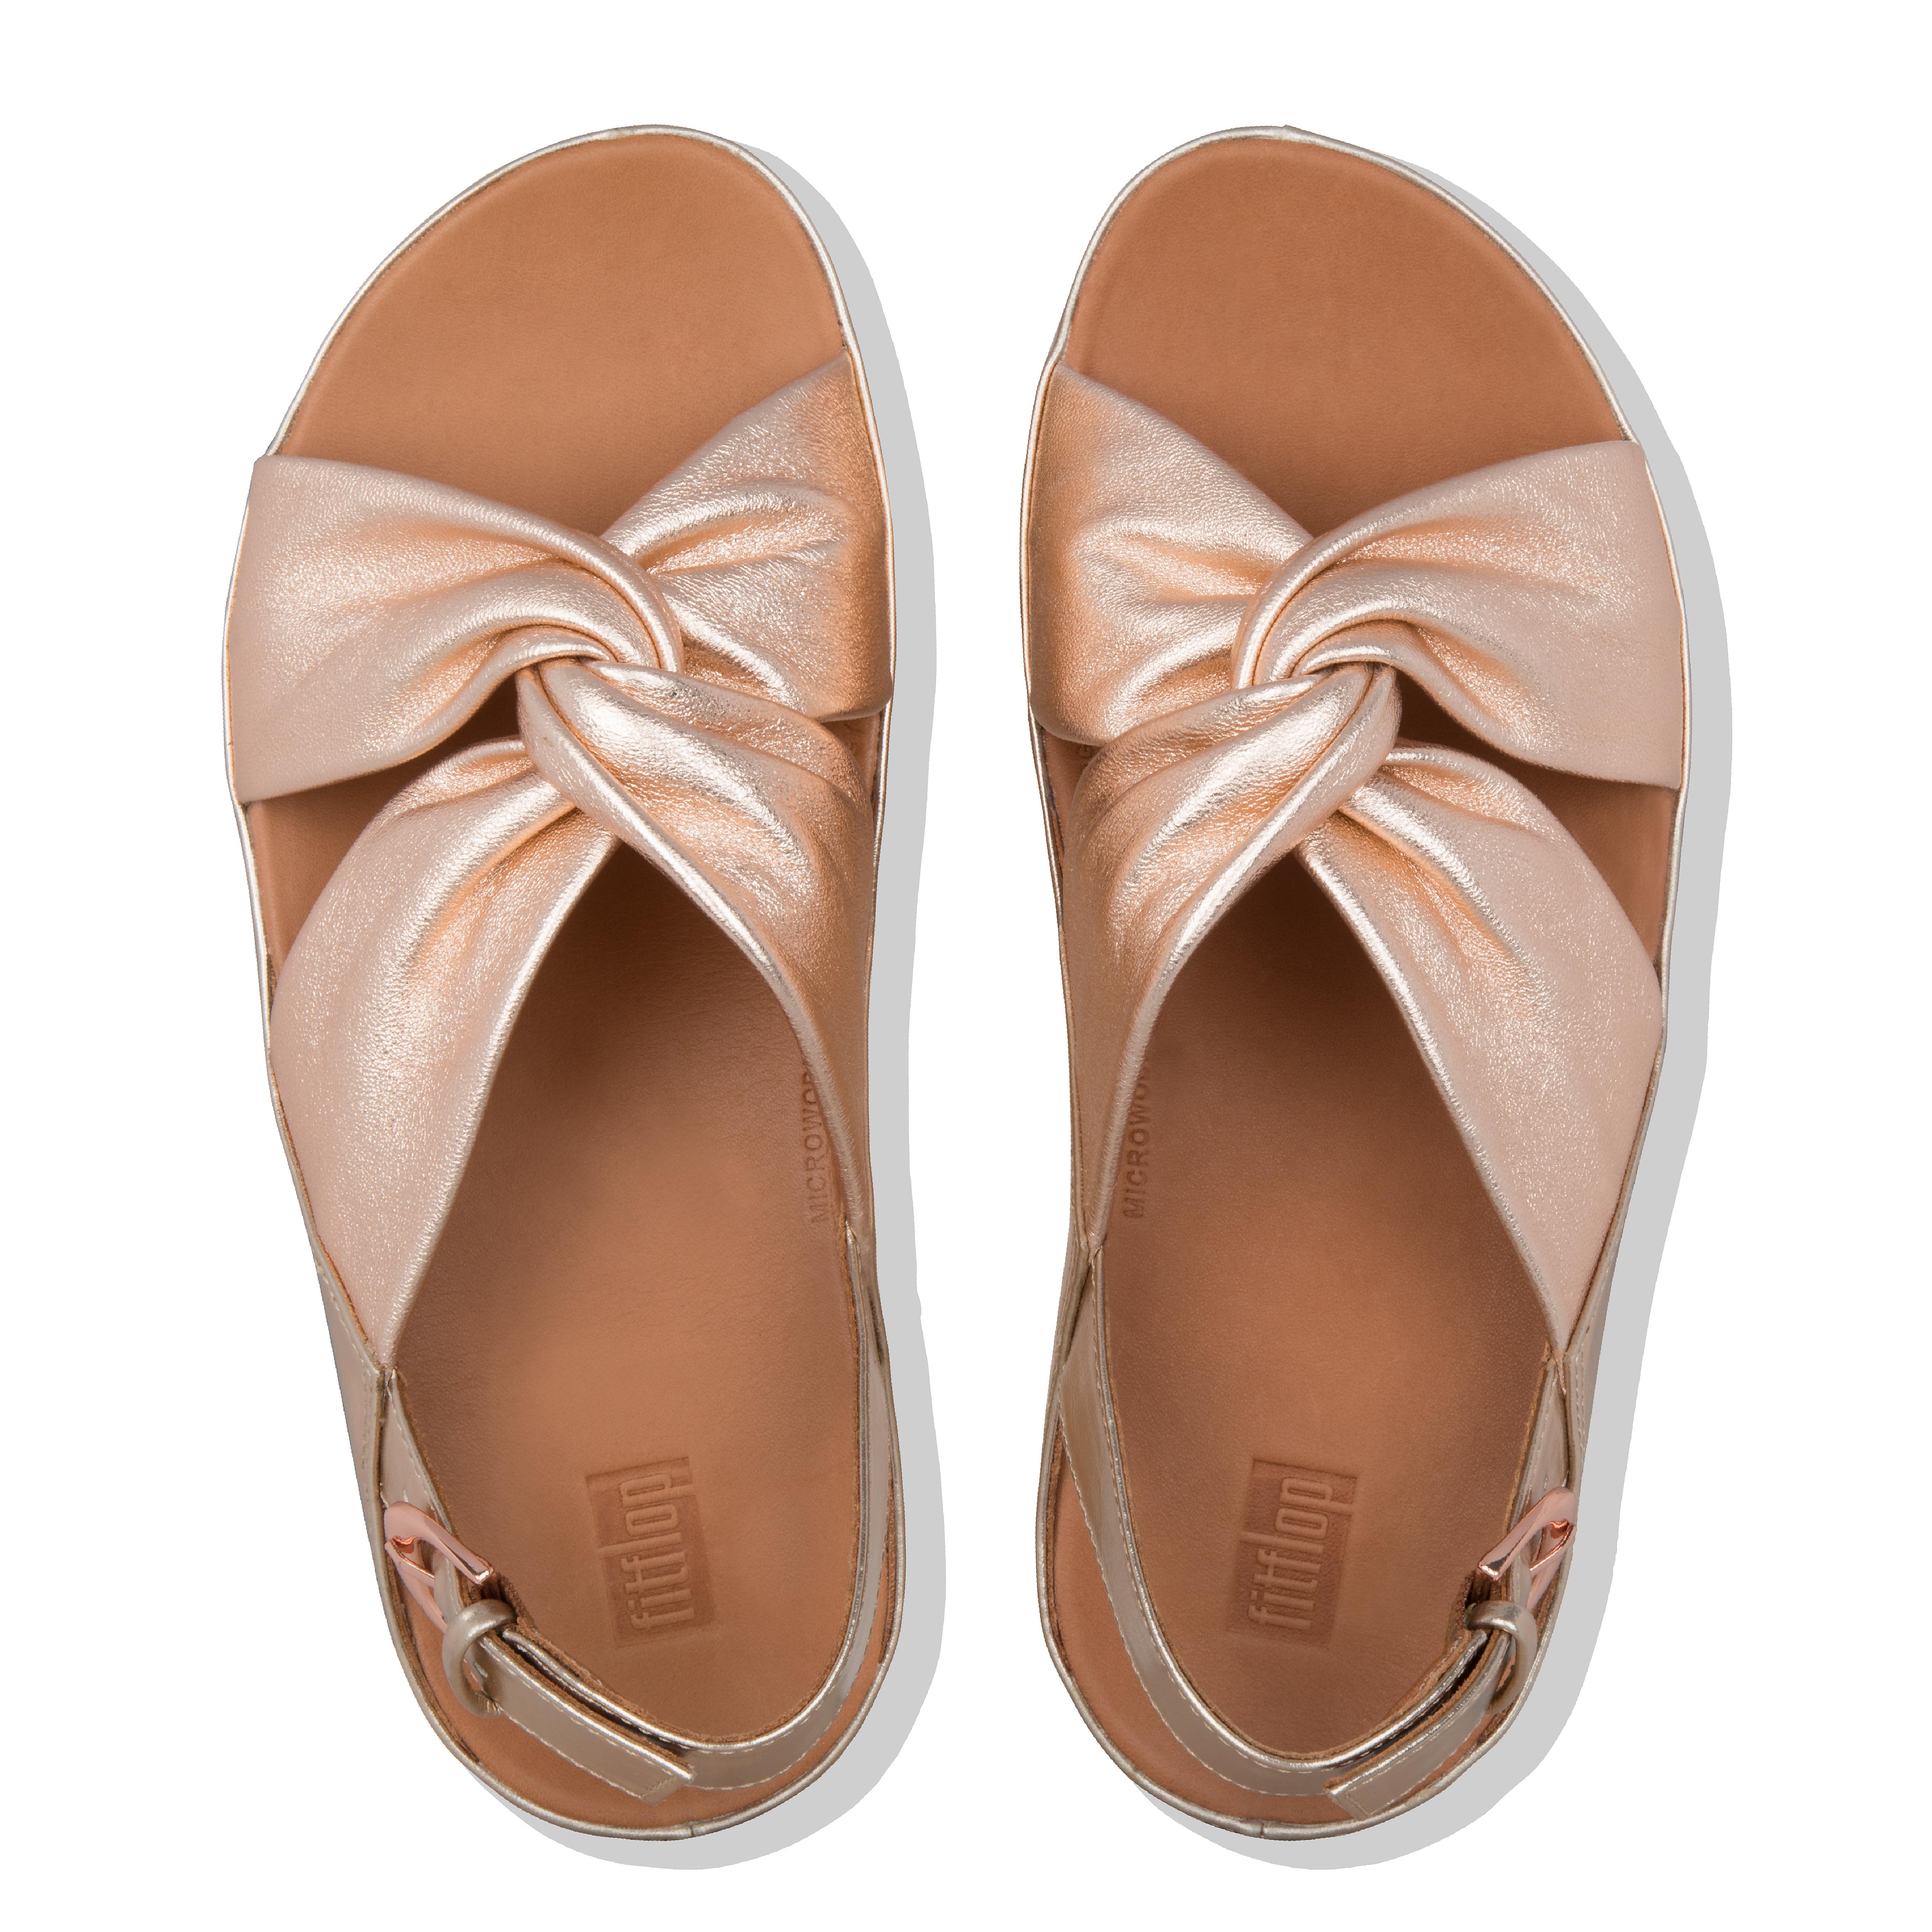 fitflop rose gold sandals